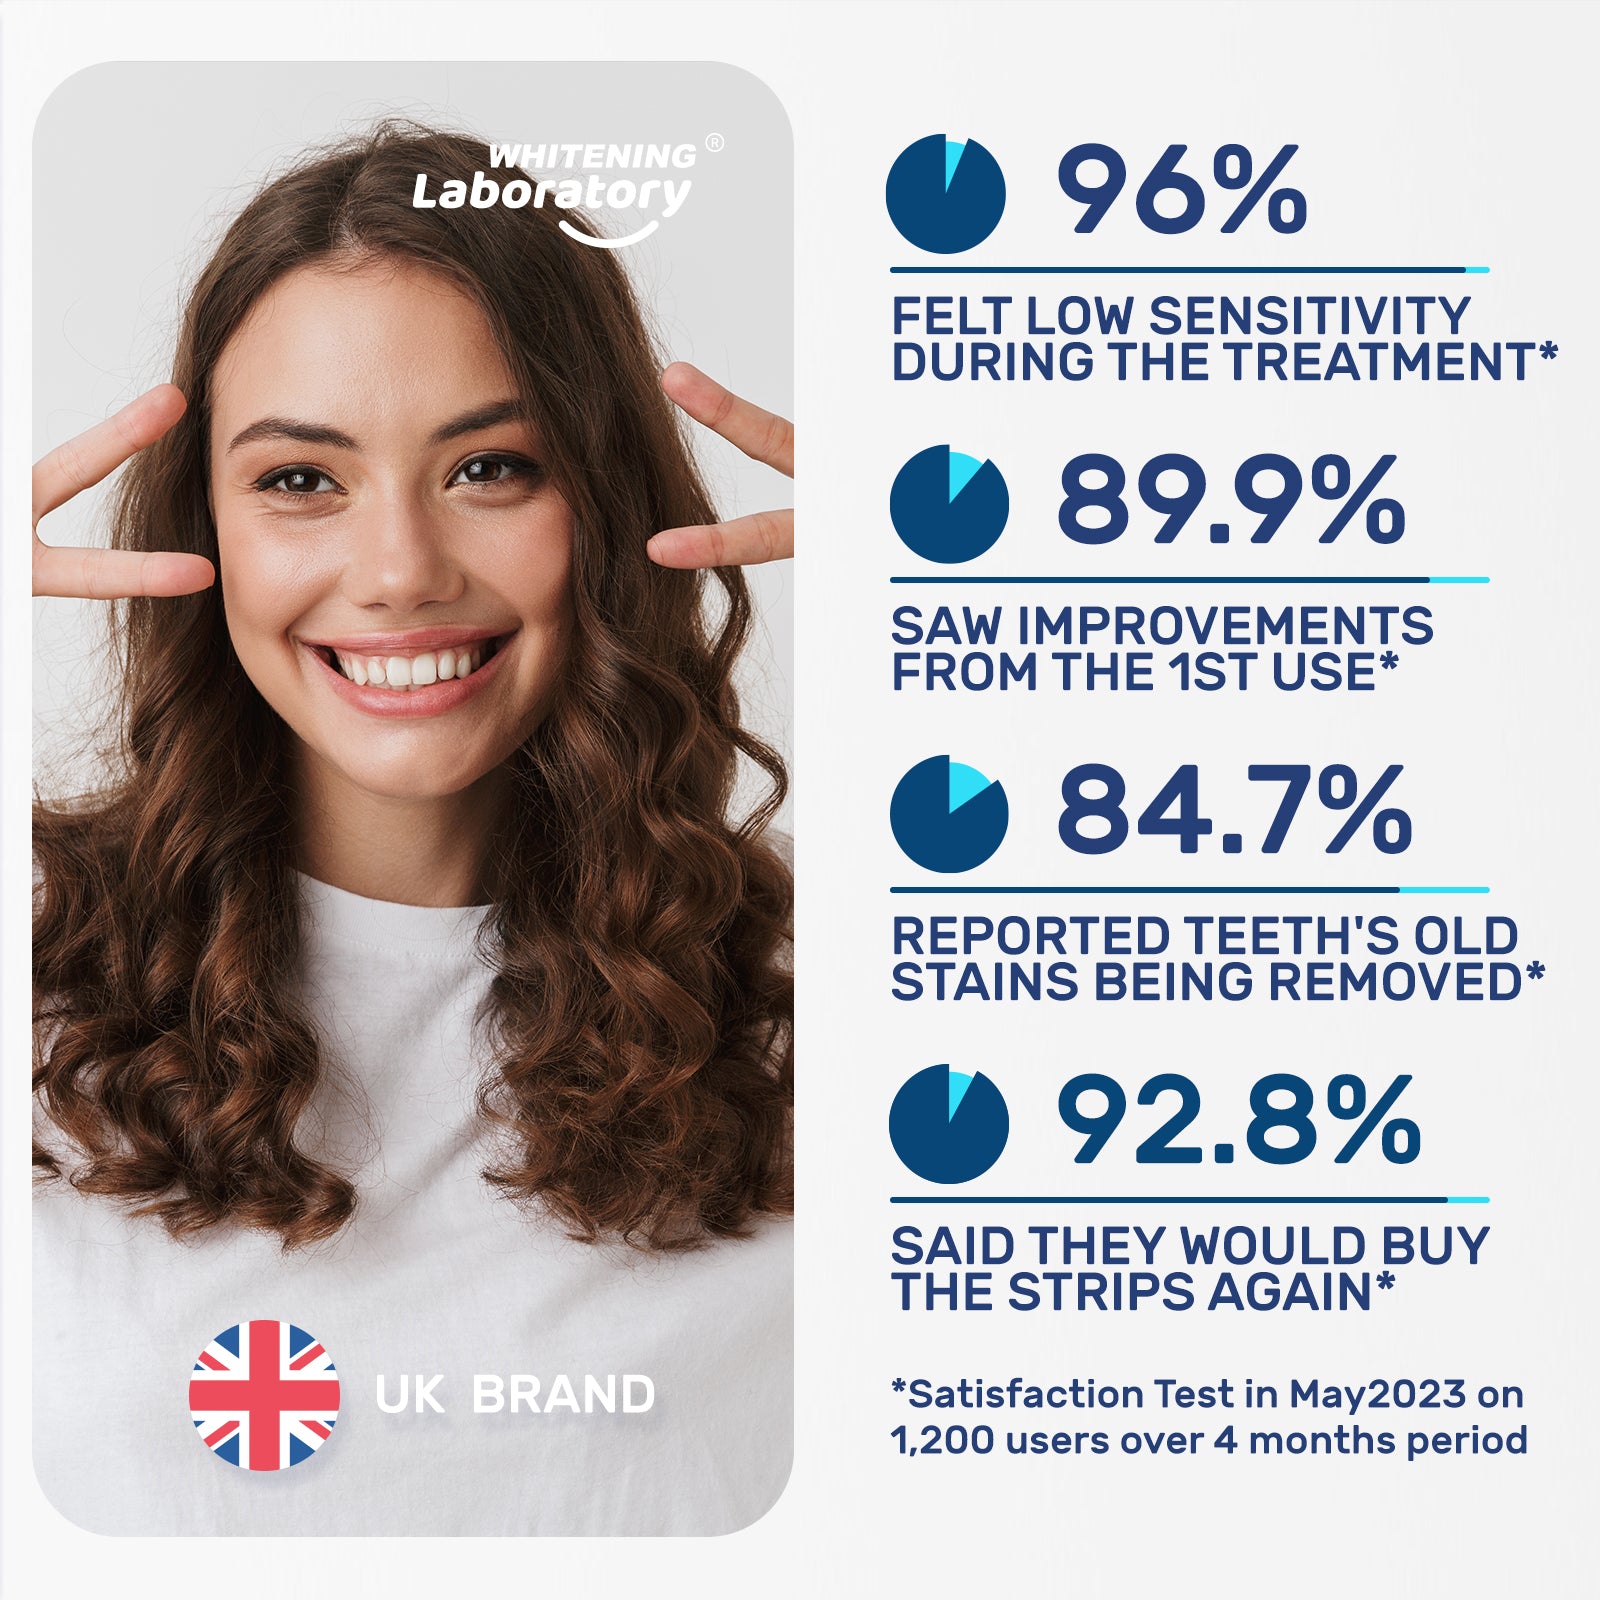 Smiling woman showing teeth with statistics of customer satisfaction from Whitening Laboratory, highlighting low sensitivity and high repurchase intention.